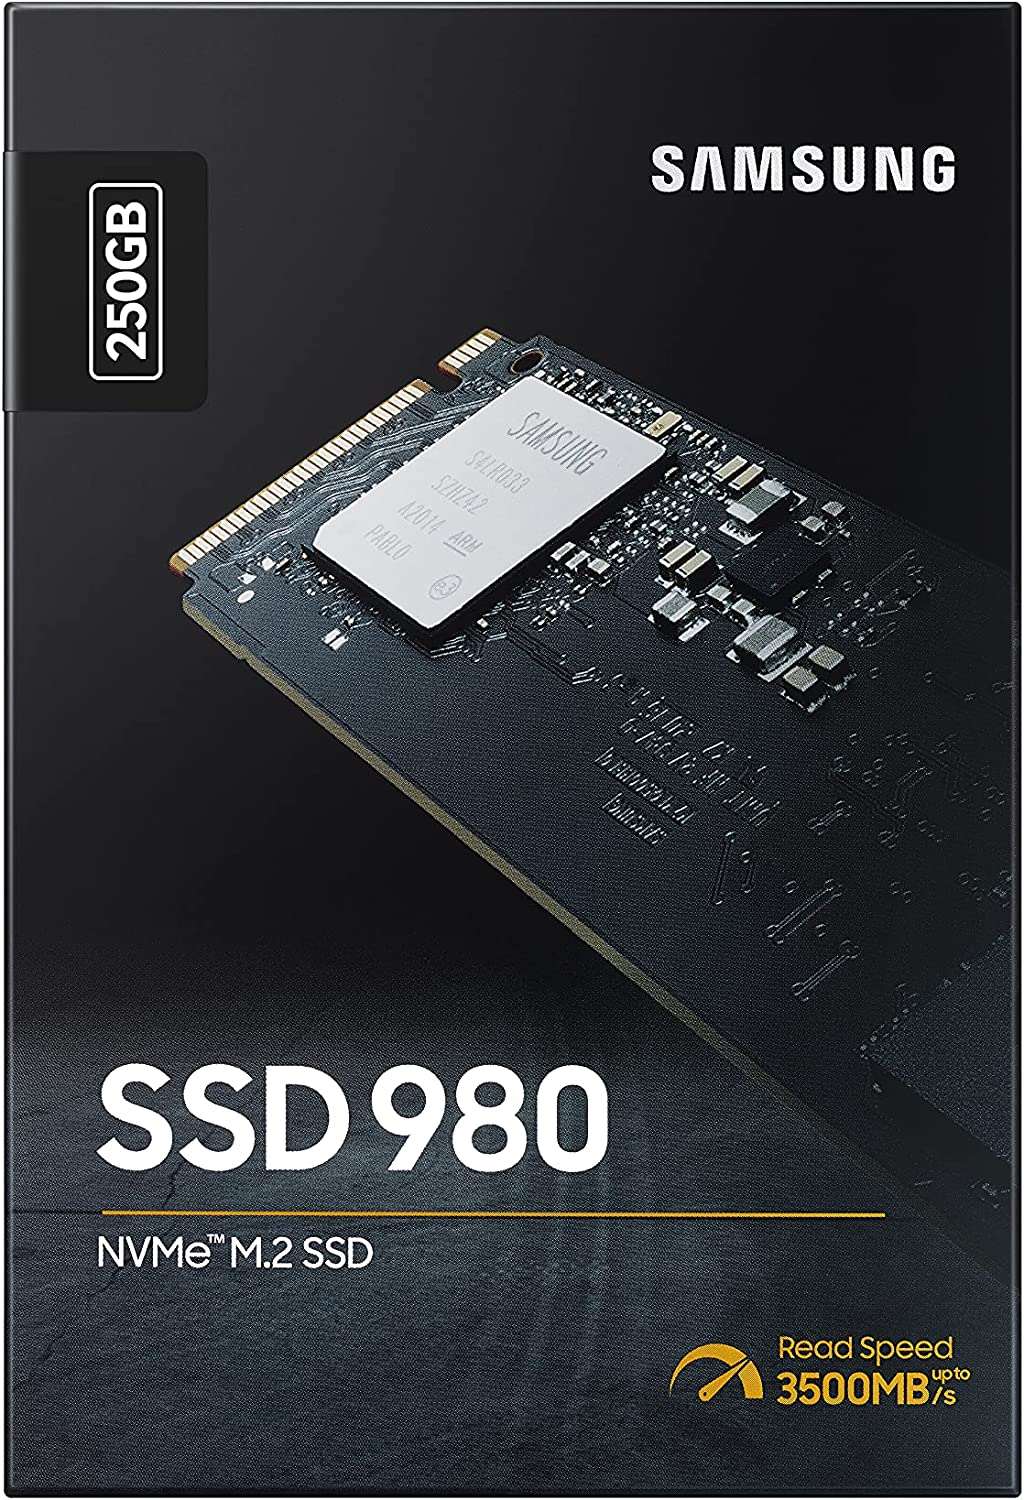 Samsung 980 NVMe M.2 Solid State Drive, Black, 3500mb/s read speed SSD